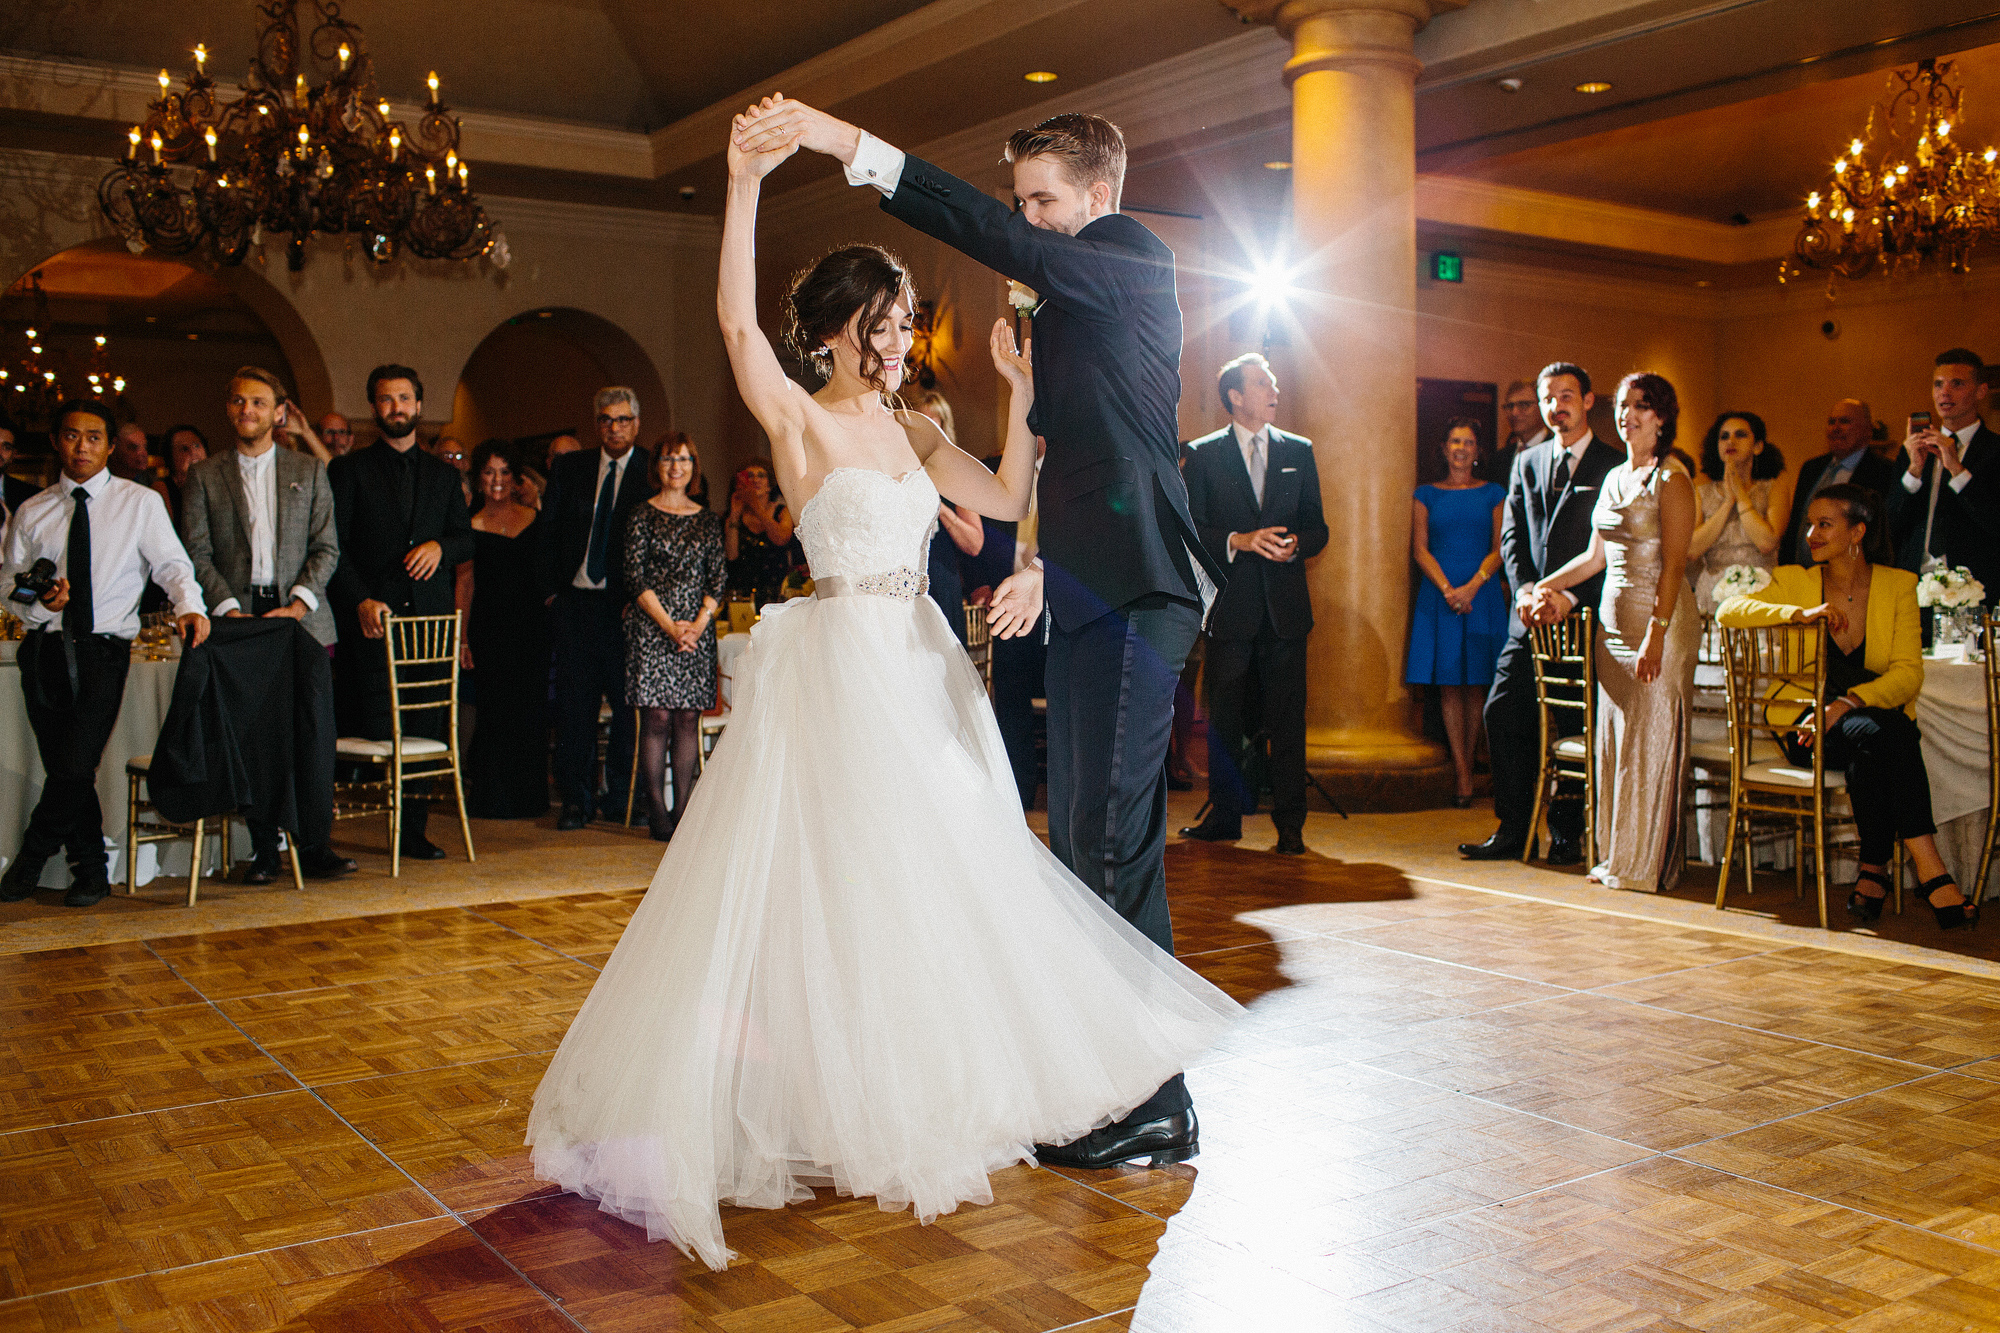 Laura spinning during the first dance. 